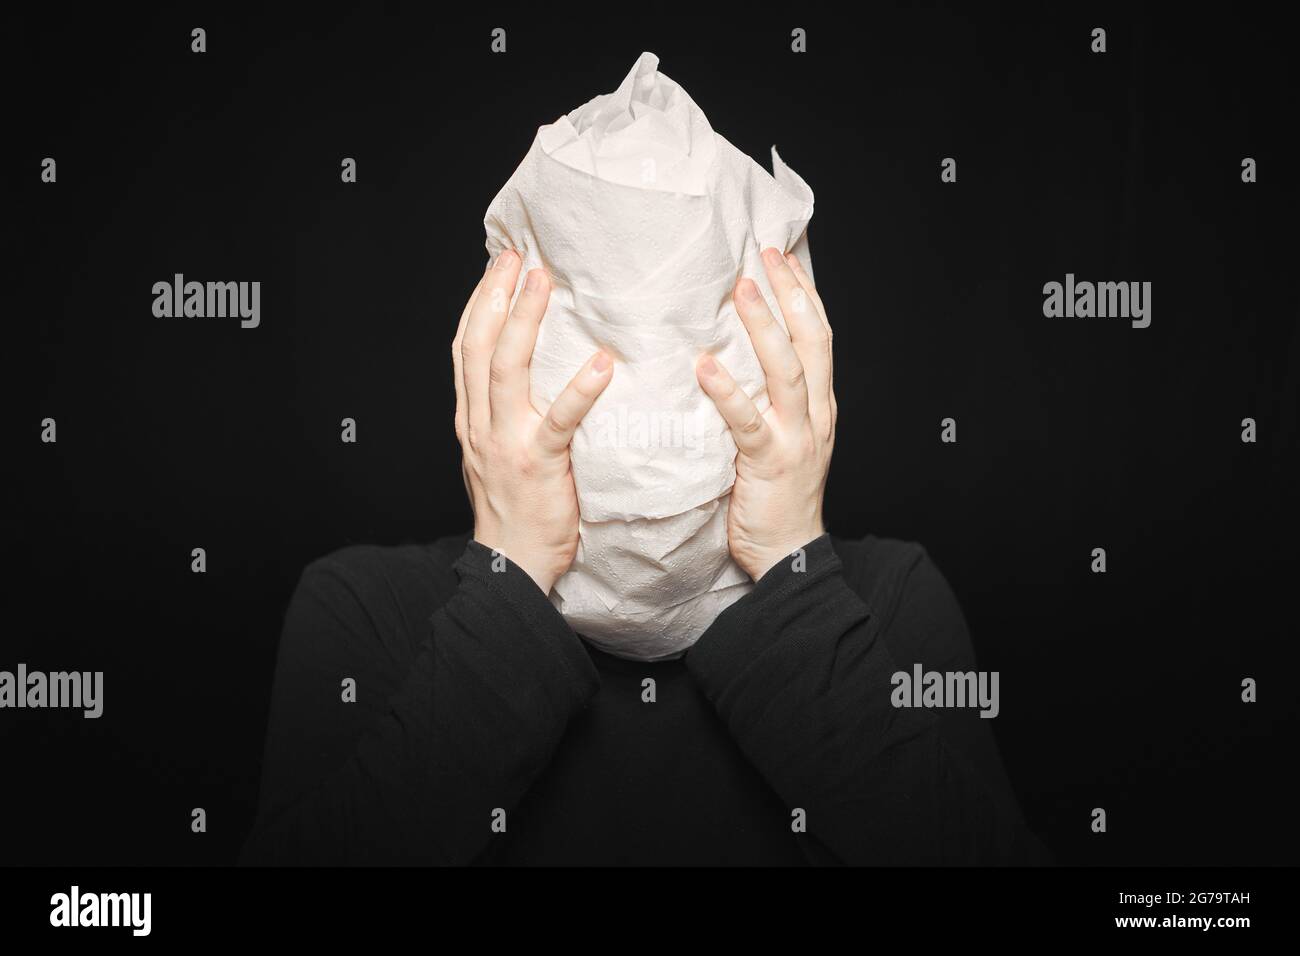 Head wrapped in toilet paper. Man holds his hands behind his head. Funny man, black background. Mummy, mental health concept. Oh my god. Stock Photo